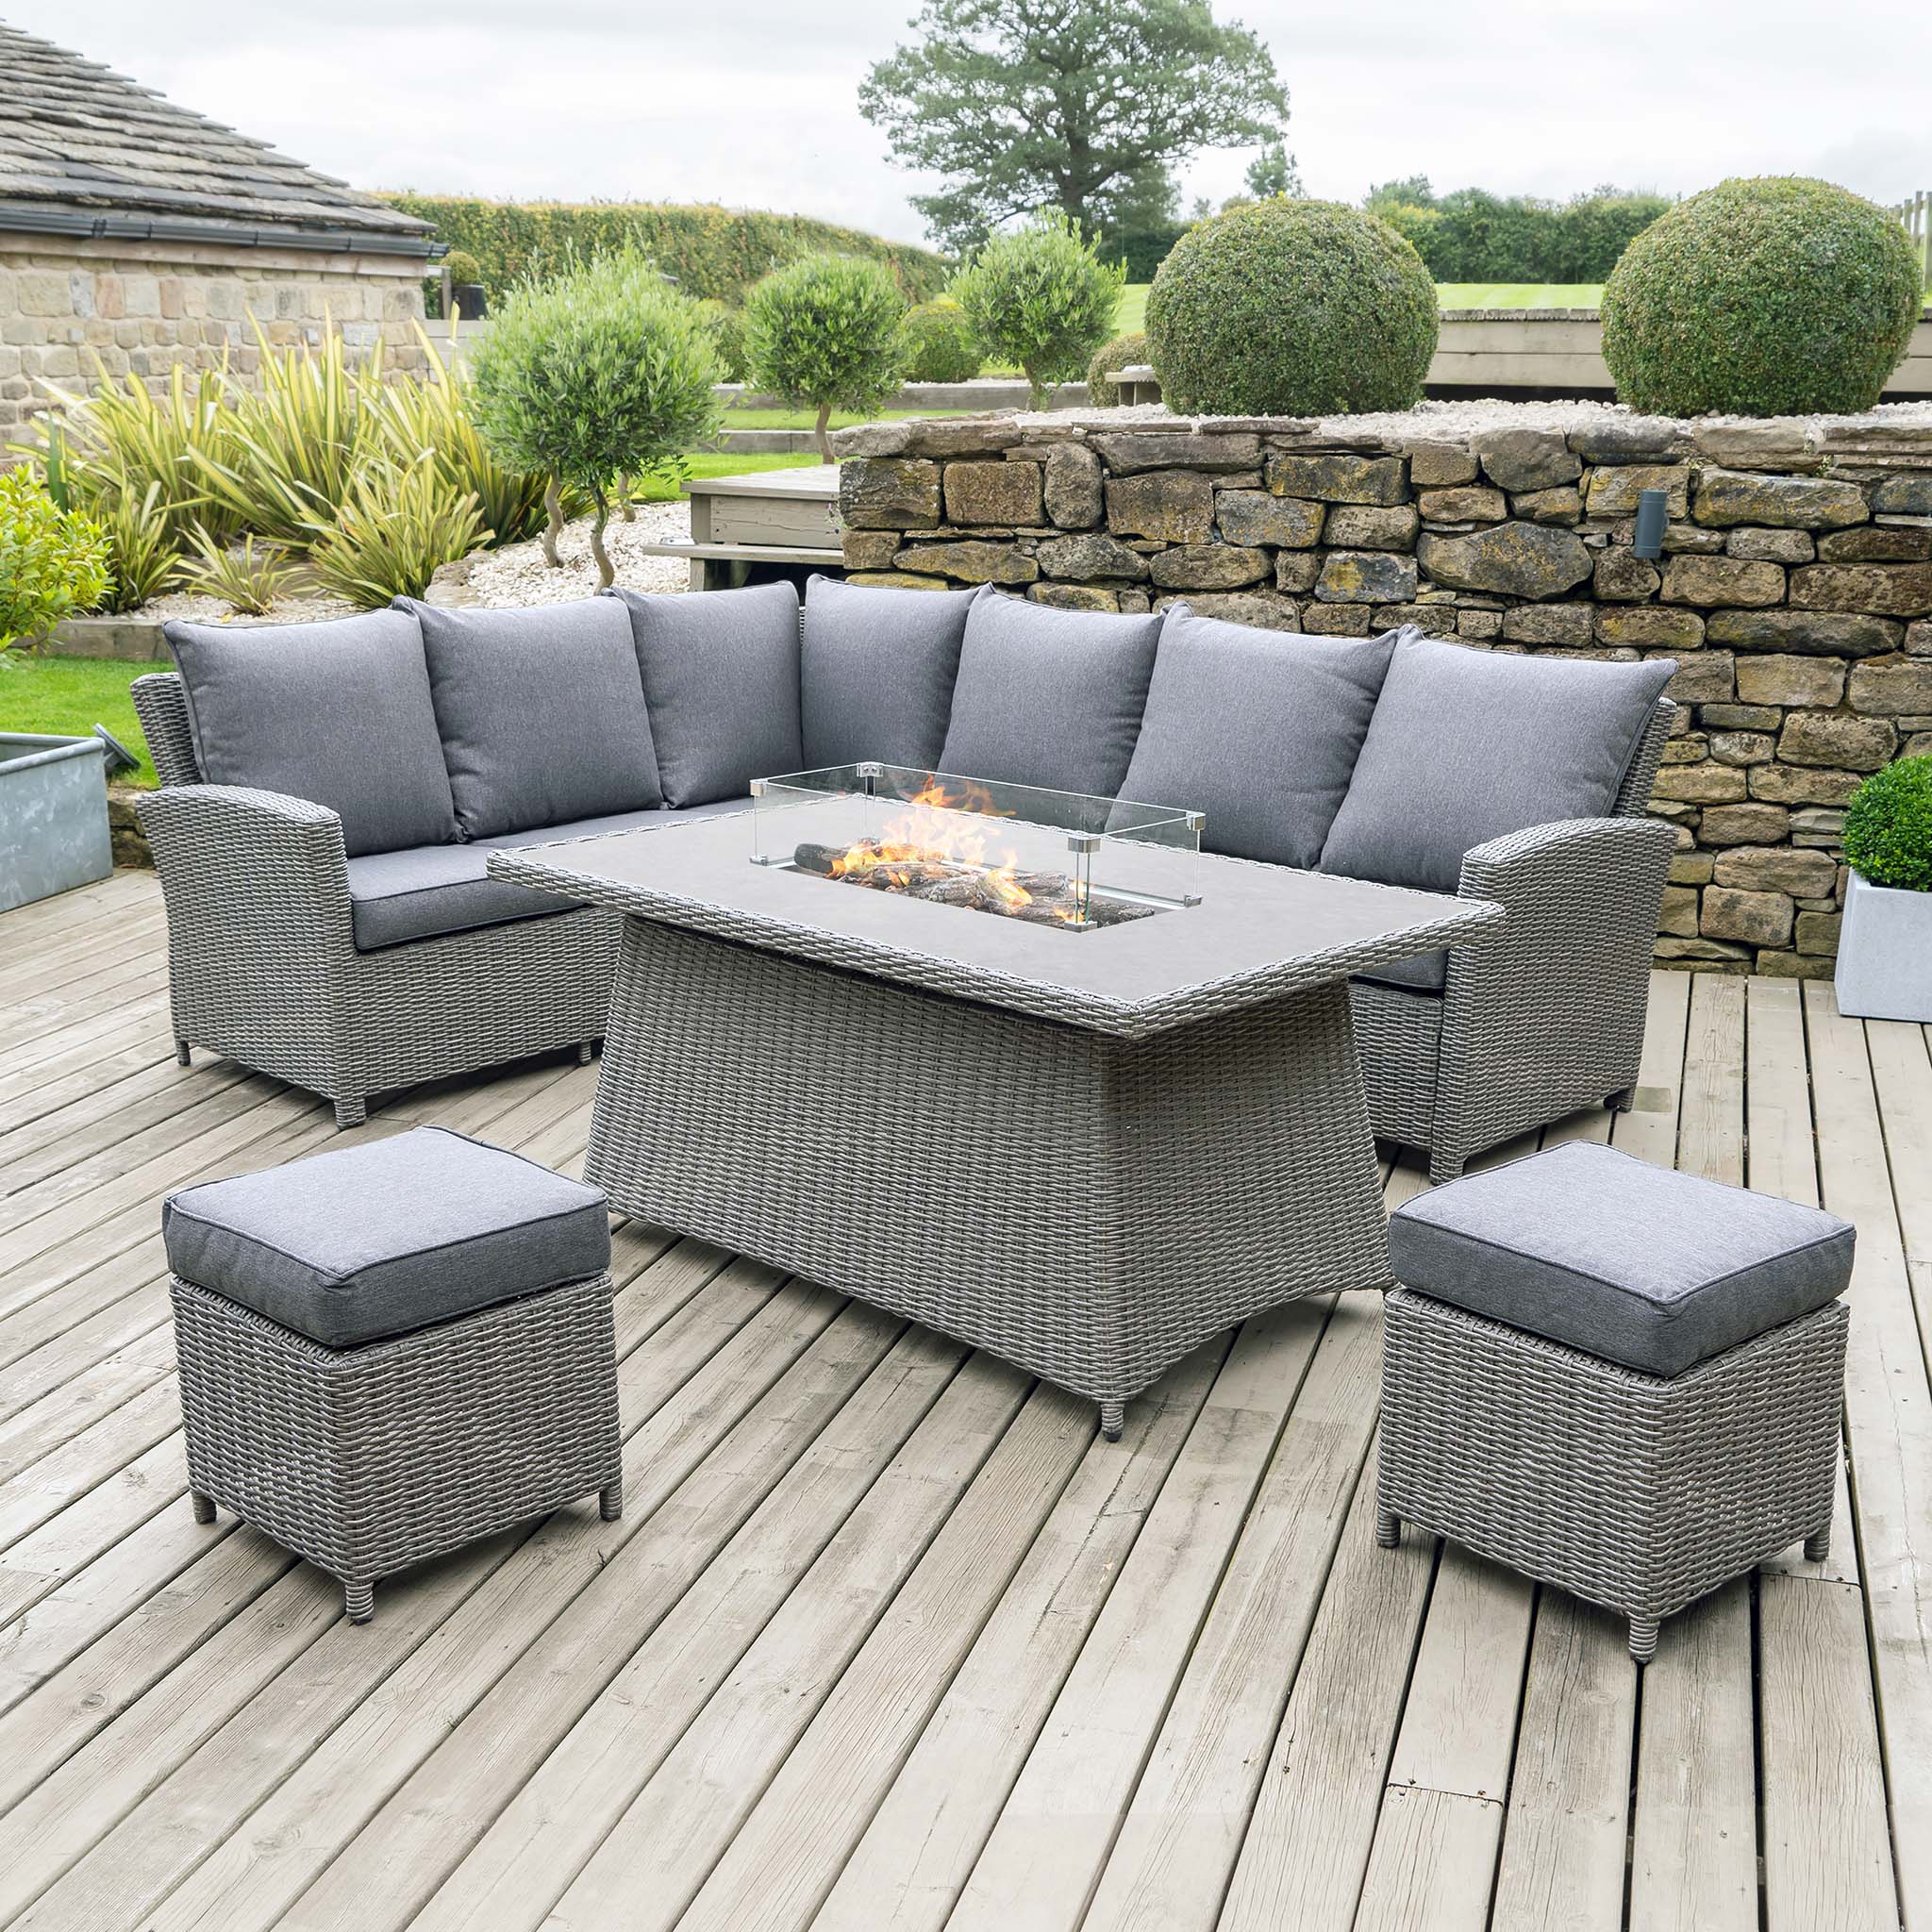 Barbados Rattan Corner Dining Set with Firepit Table in Slate Grey (Left Hand)